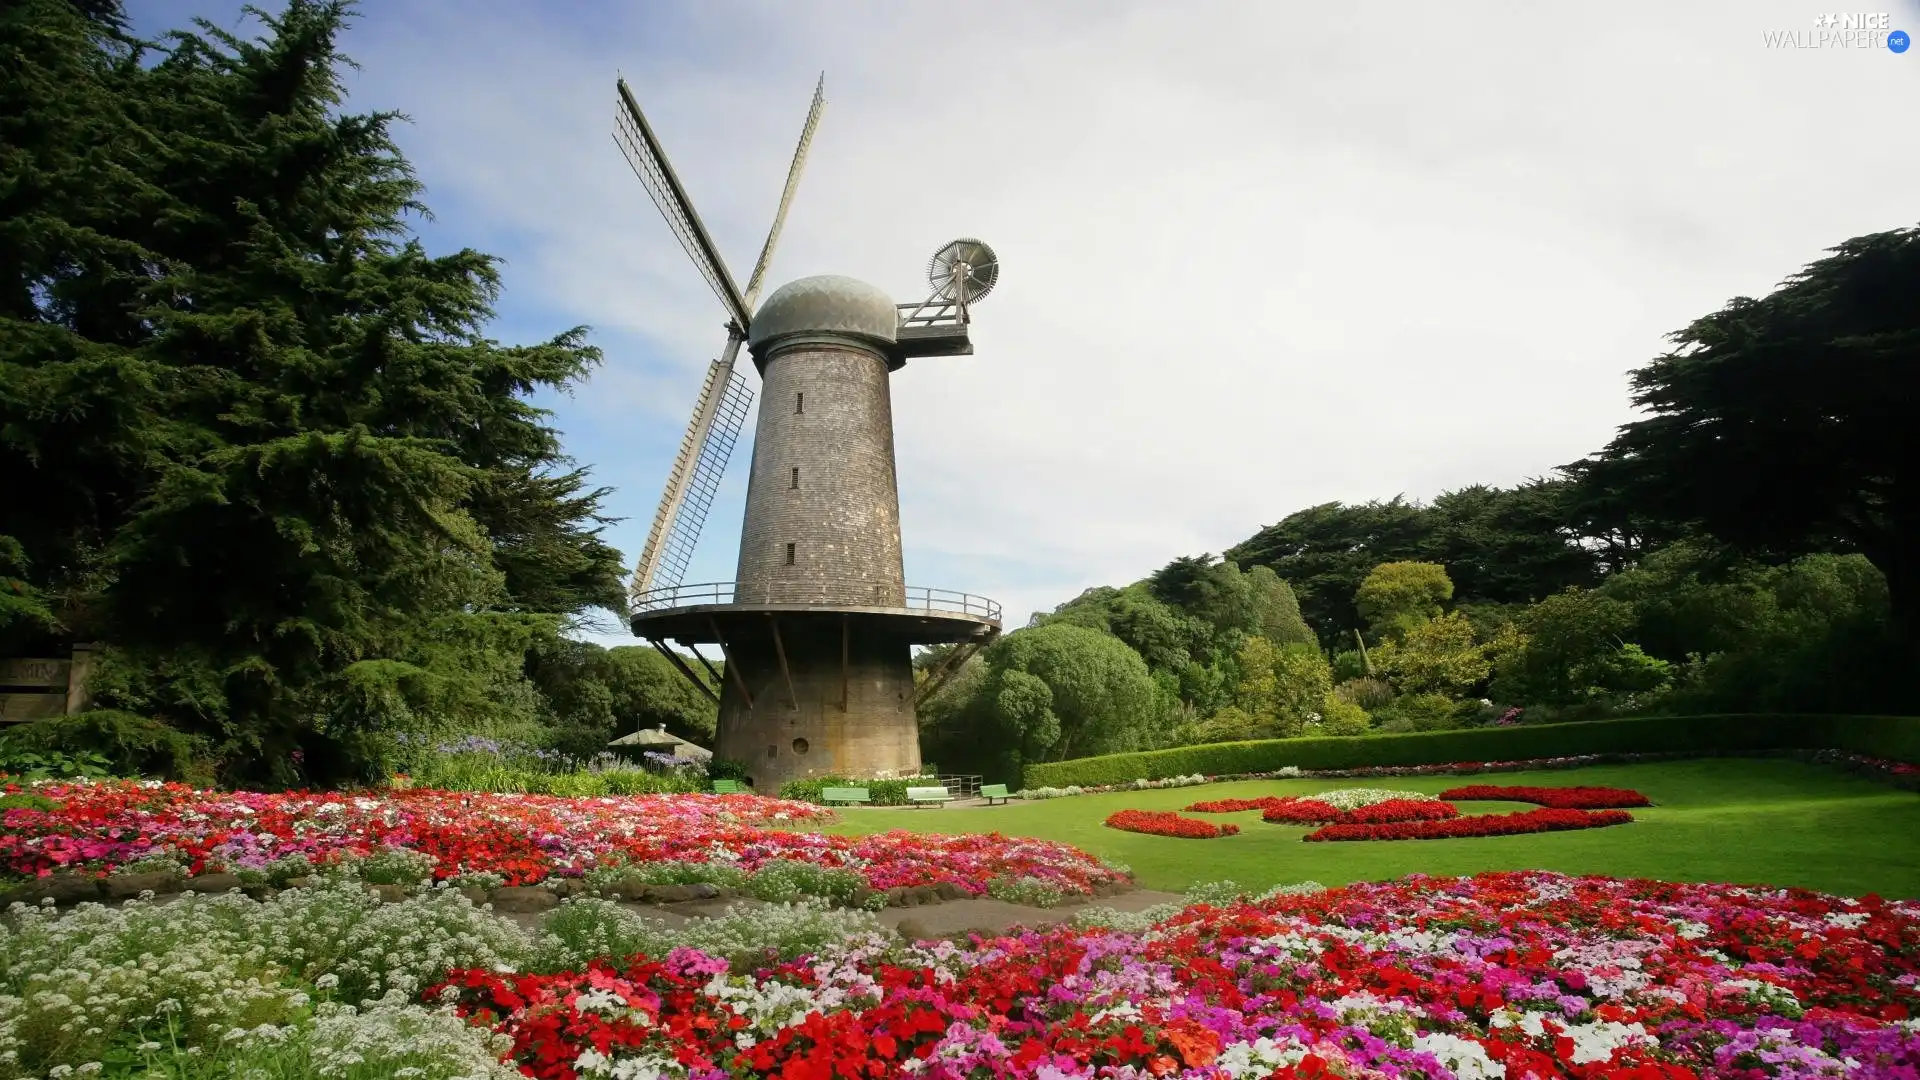 Flowers, viewes, Windmill, trees